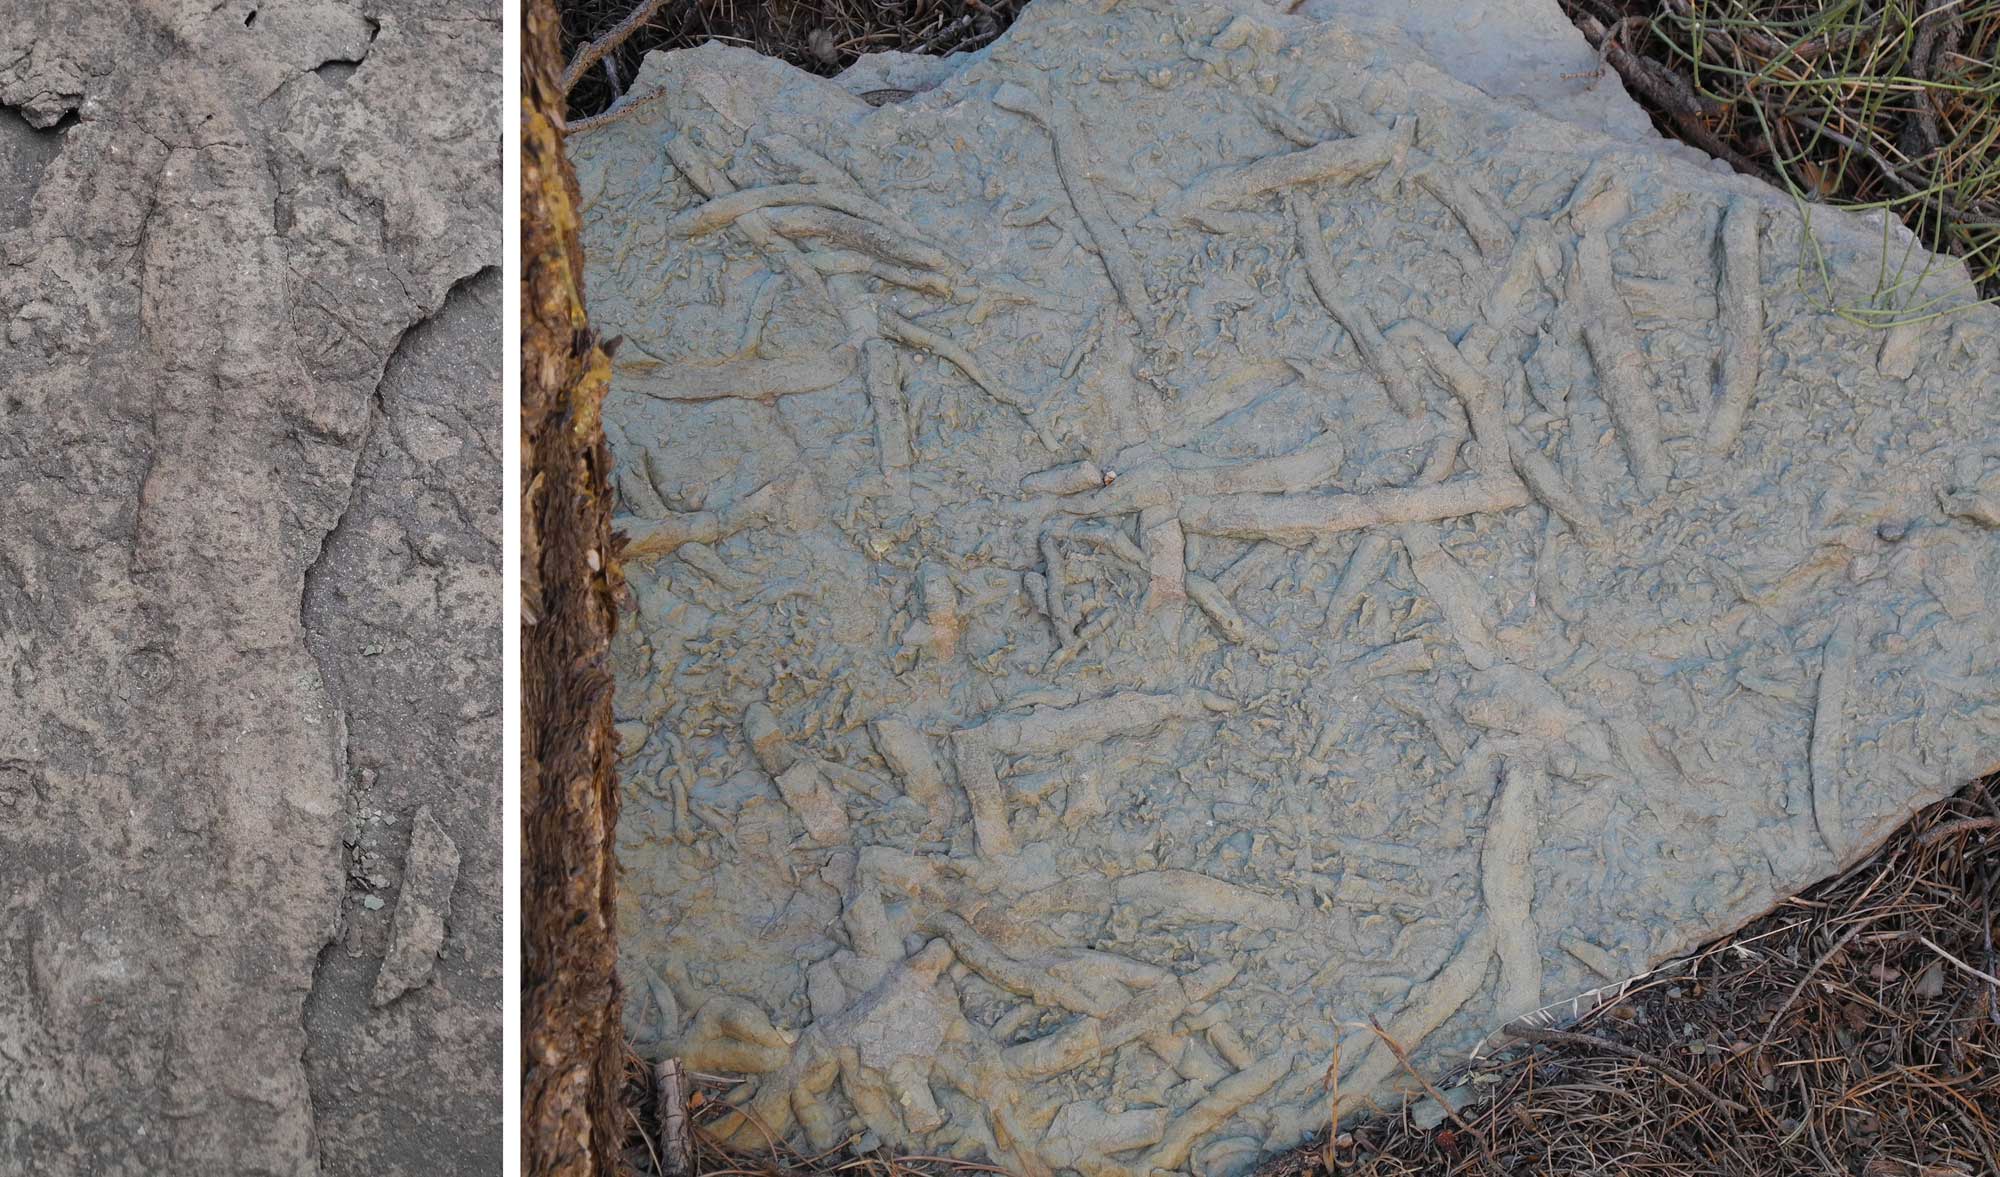 2-panel figure showing photos of trace fossils from Grand Canyon National Park. Panel 1: Cruziana, a linear trace with a central depression often attributed to trilobites. Panel 2: A slab with overlapping traces, including worm burrows and Cruziana.